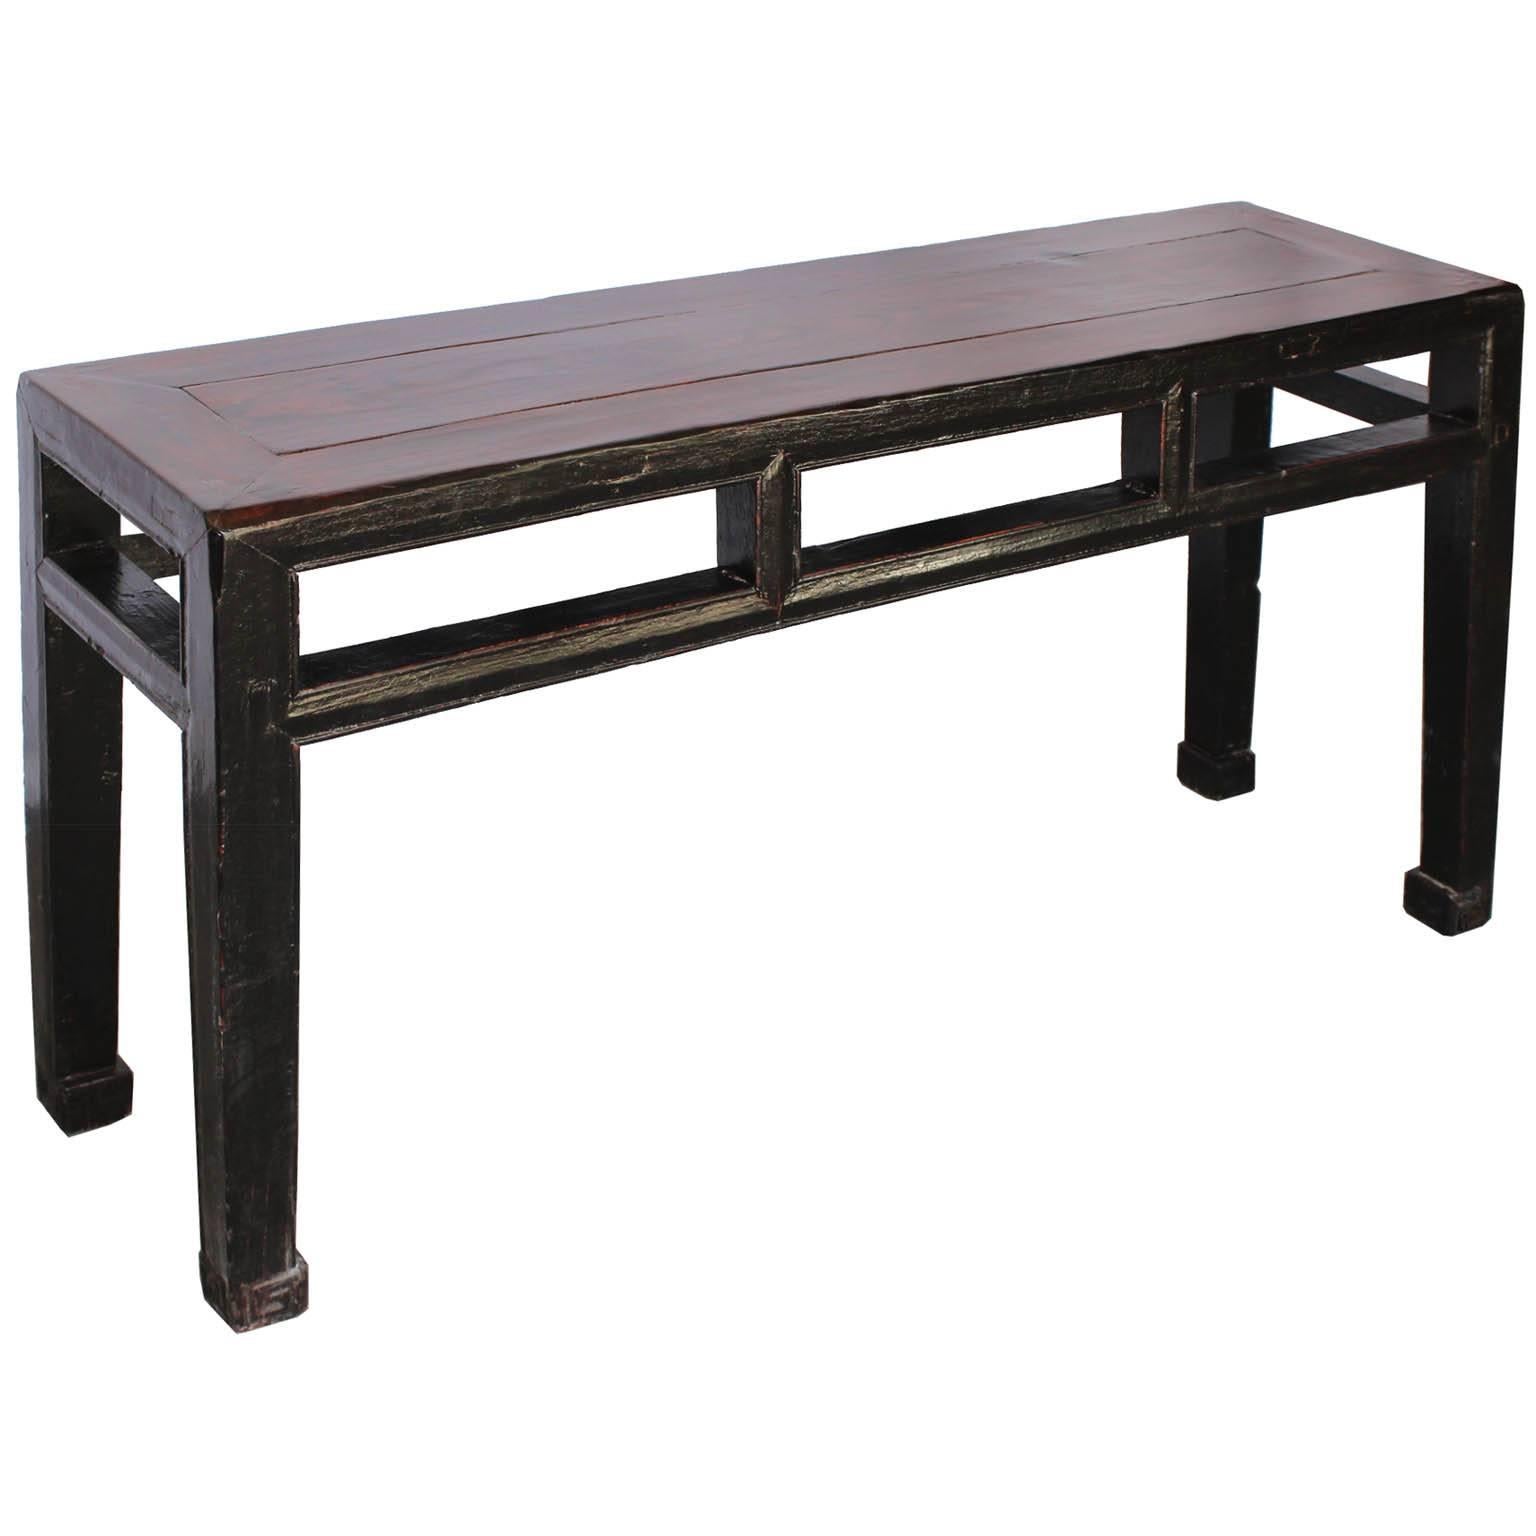 Two-toned elm bench with beautiful elm grain wood top, support bars and scroll feet can be used as a coffee table or as a bench for extra seating, China, circa 1920s.